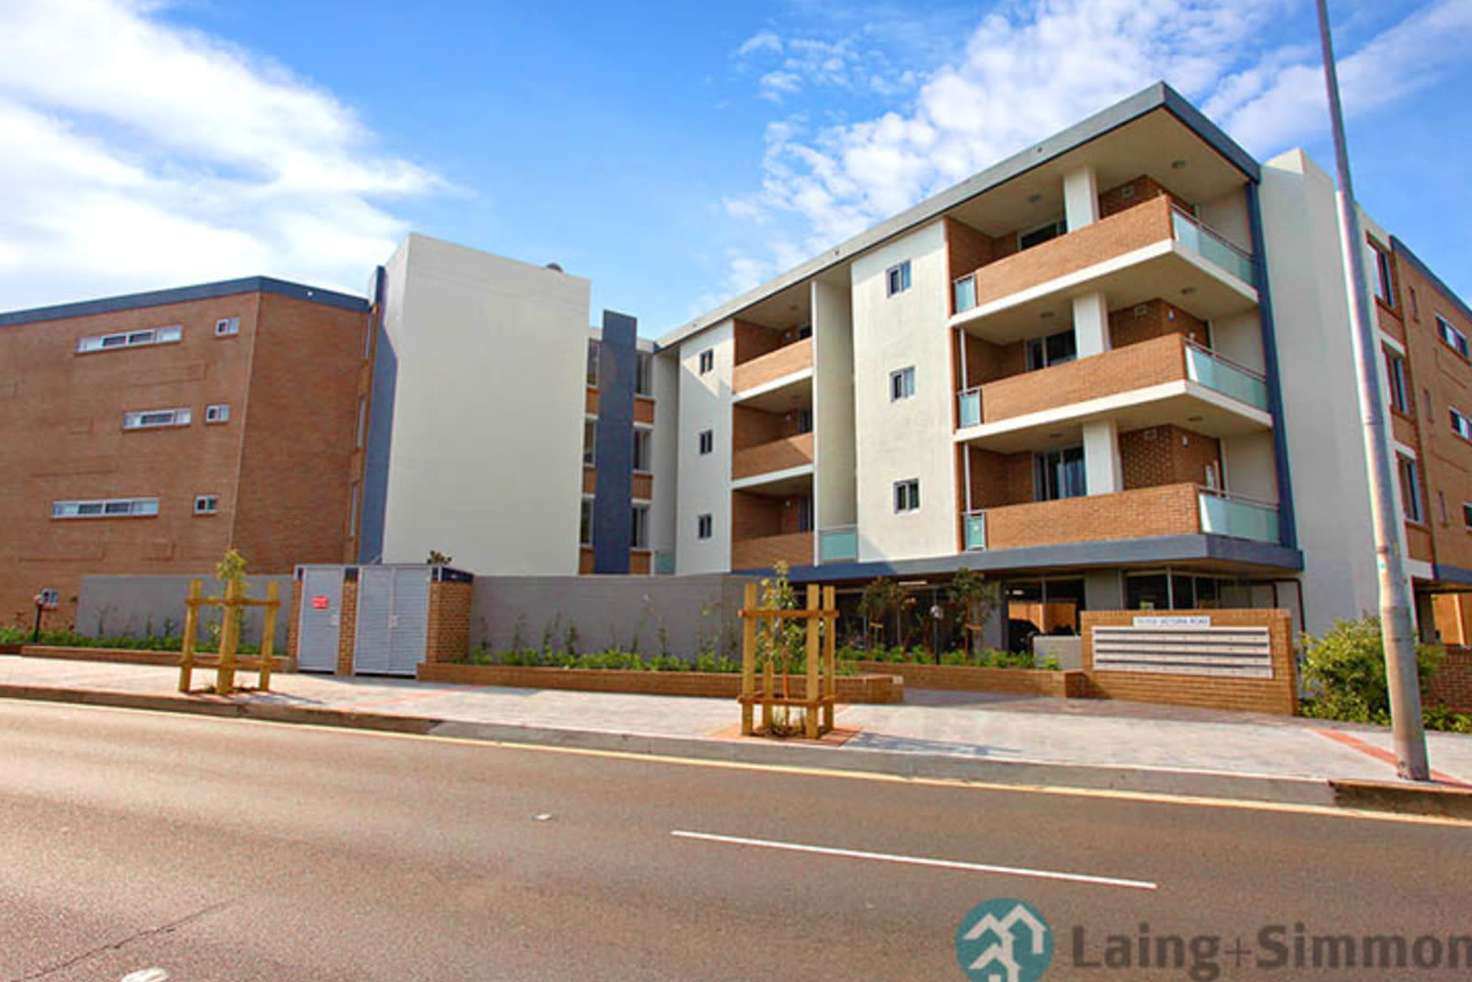 Main view of Homely unit listing, 24/701-709 Victoria Road, Ryde NSW 2112